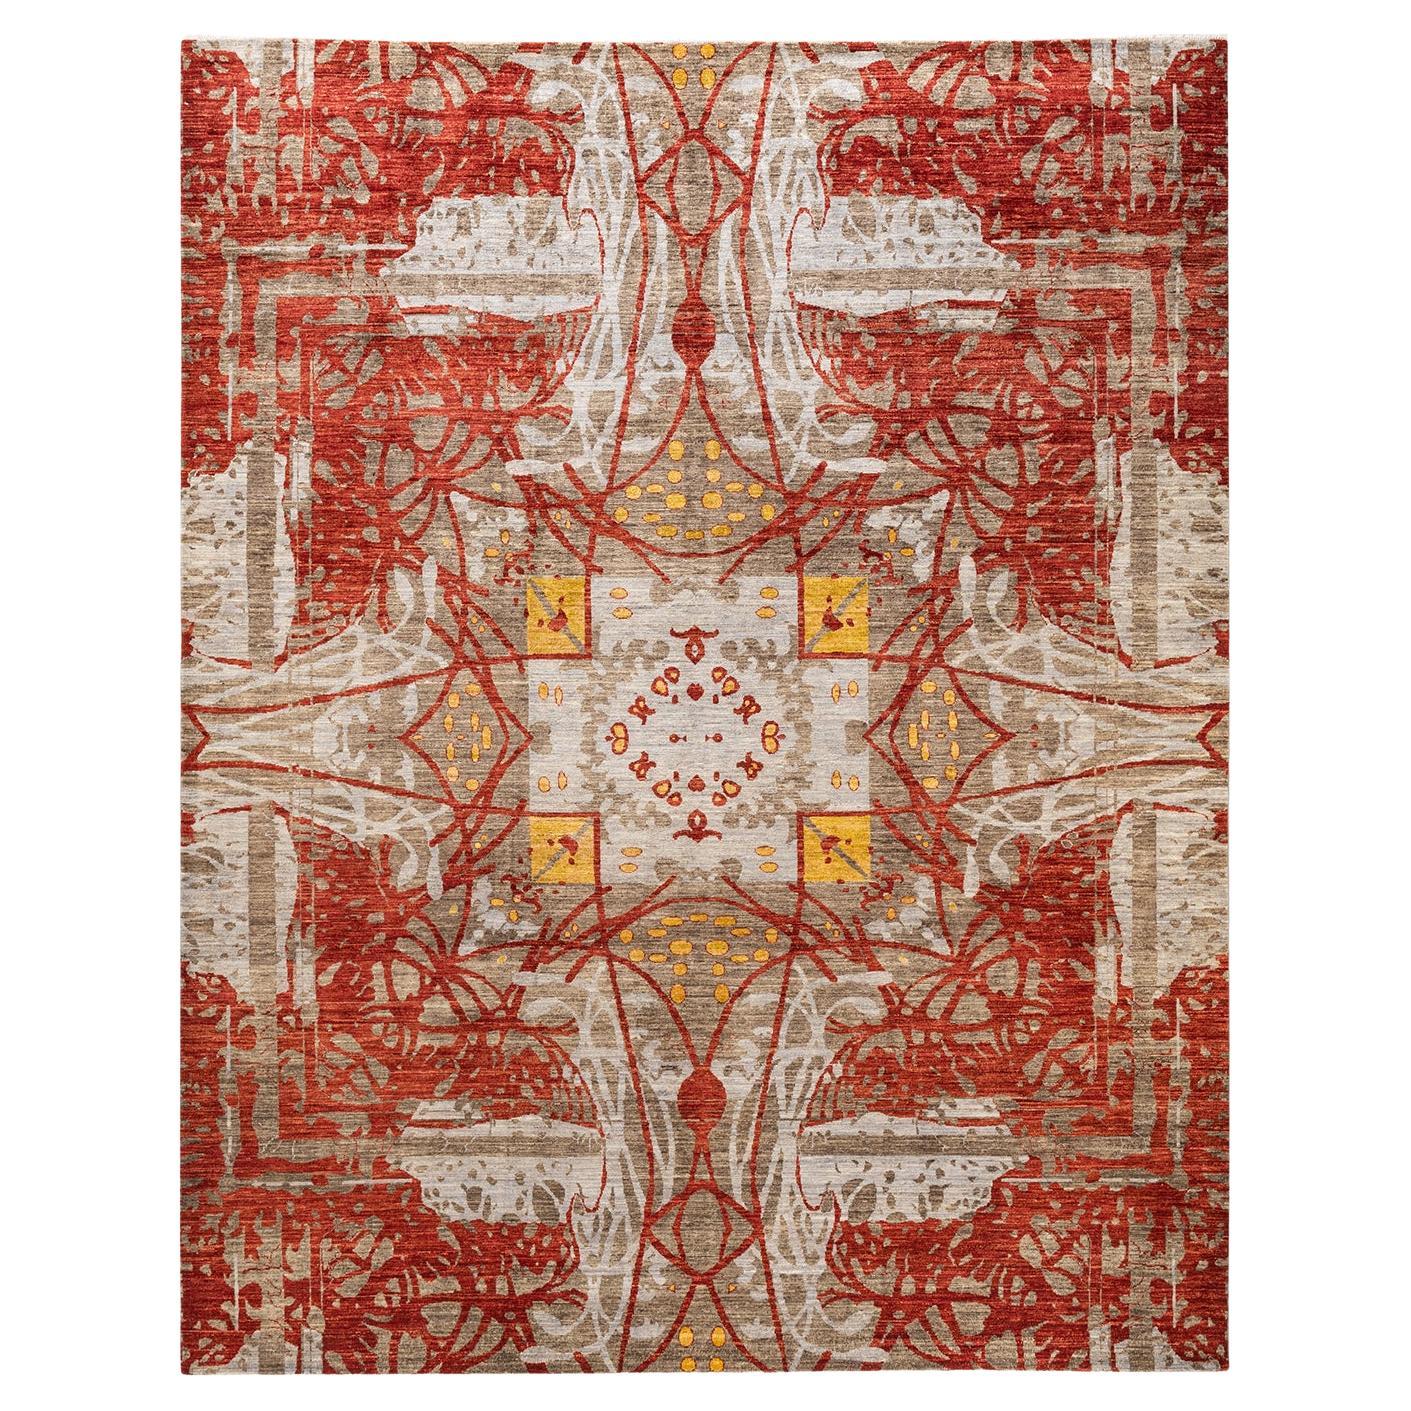 One-of-a-kind Hand Knotted Oriental Eclectic Gray Area Rug